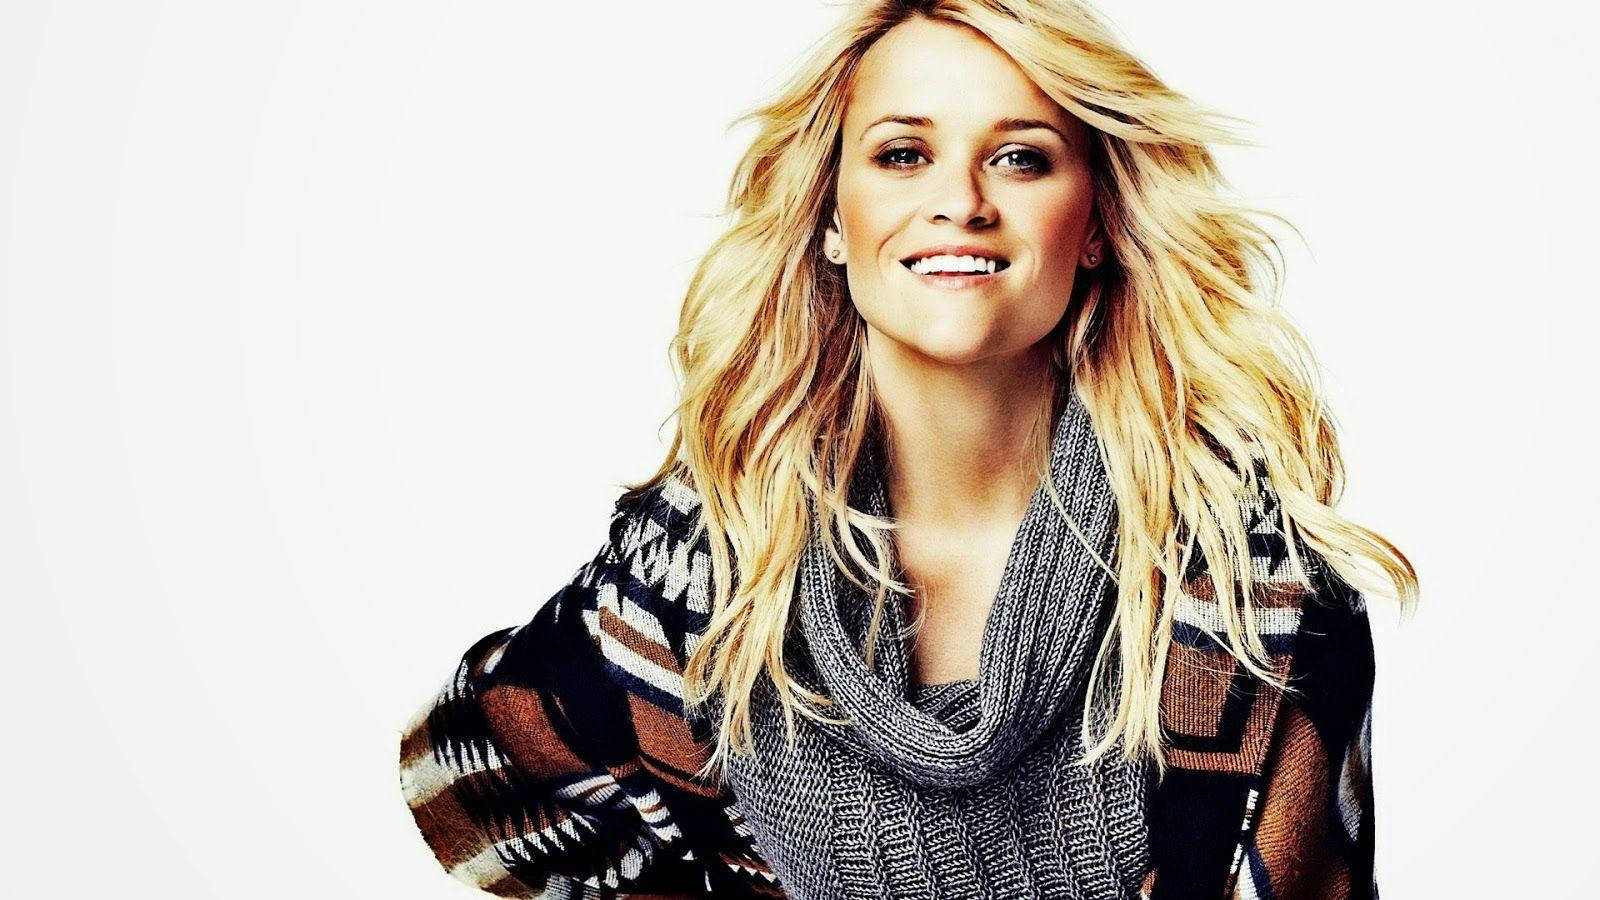 Reese Witherspoon Winter-outfit Wallpaper